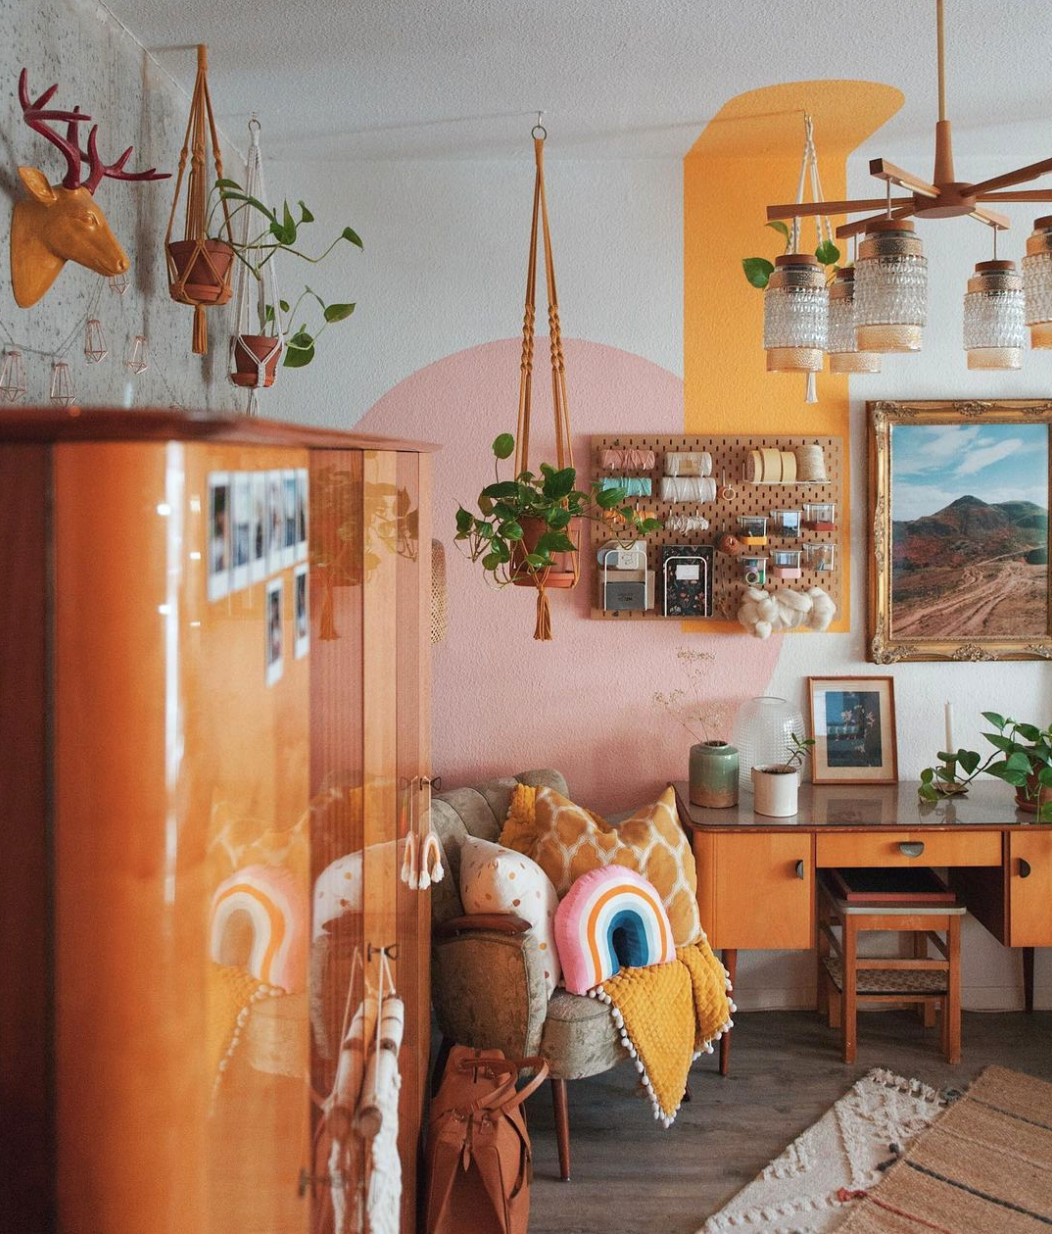 91 Magazine - Colourful, plant-filled Home Tour with Felix Grimm